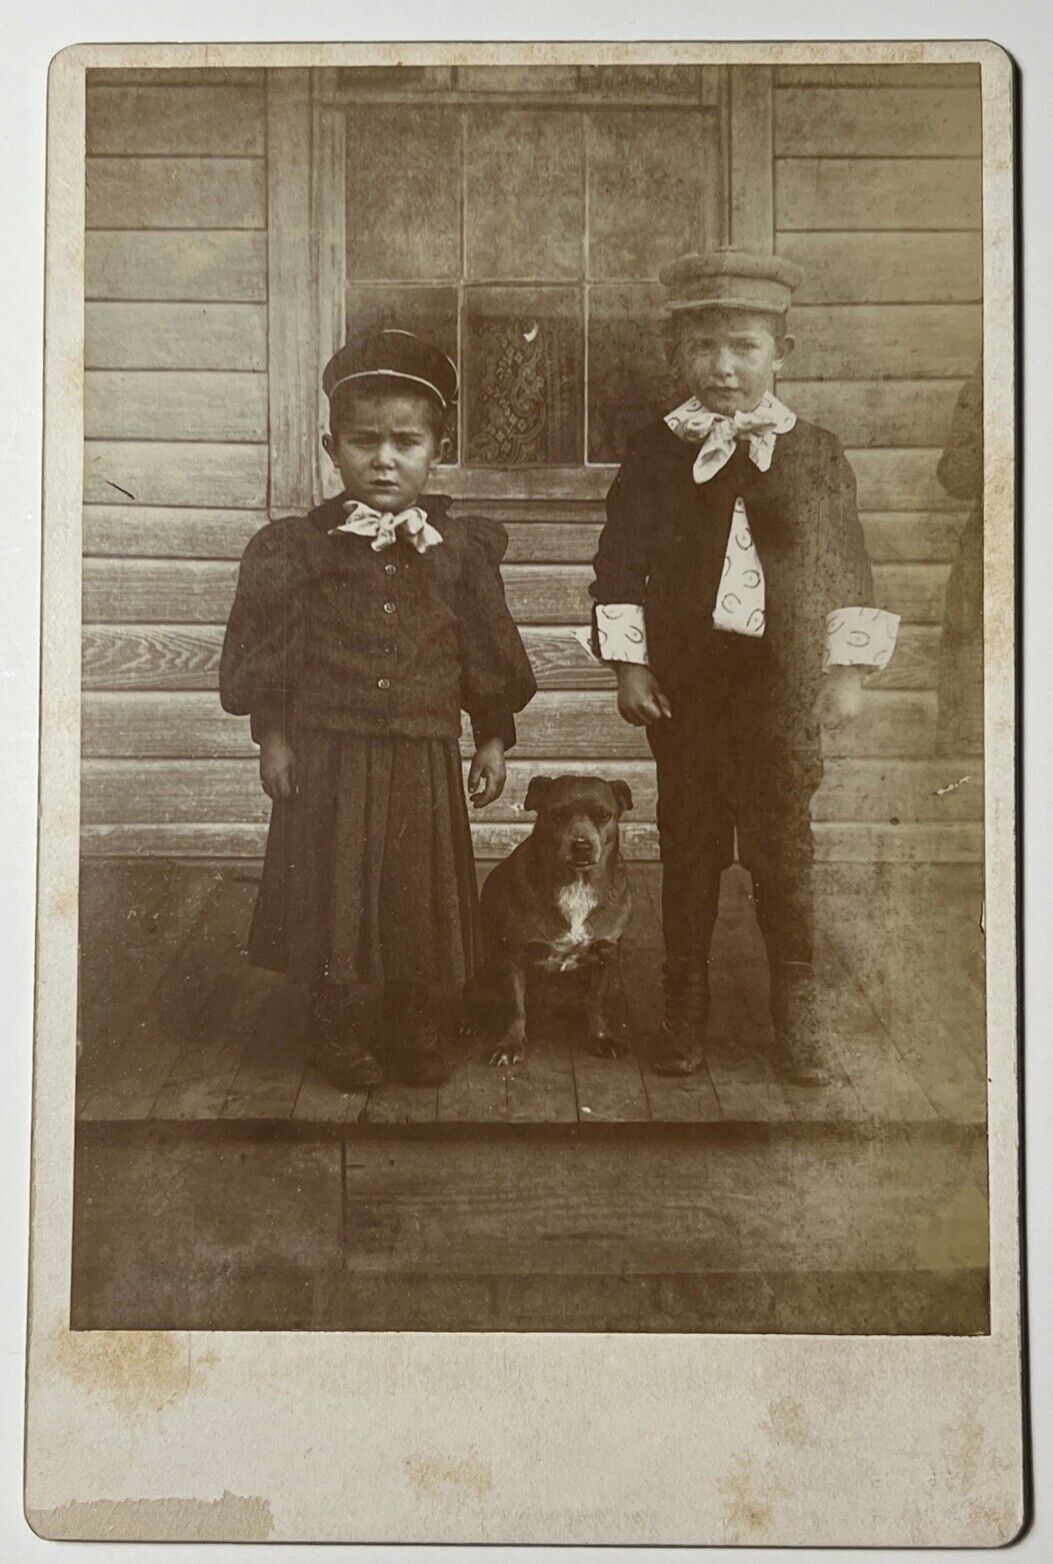 2 Victorian BOYS in Bows w PIT BULL DOG 1890s antique Cabinet Card Photo